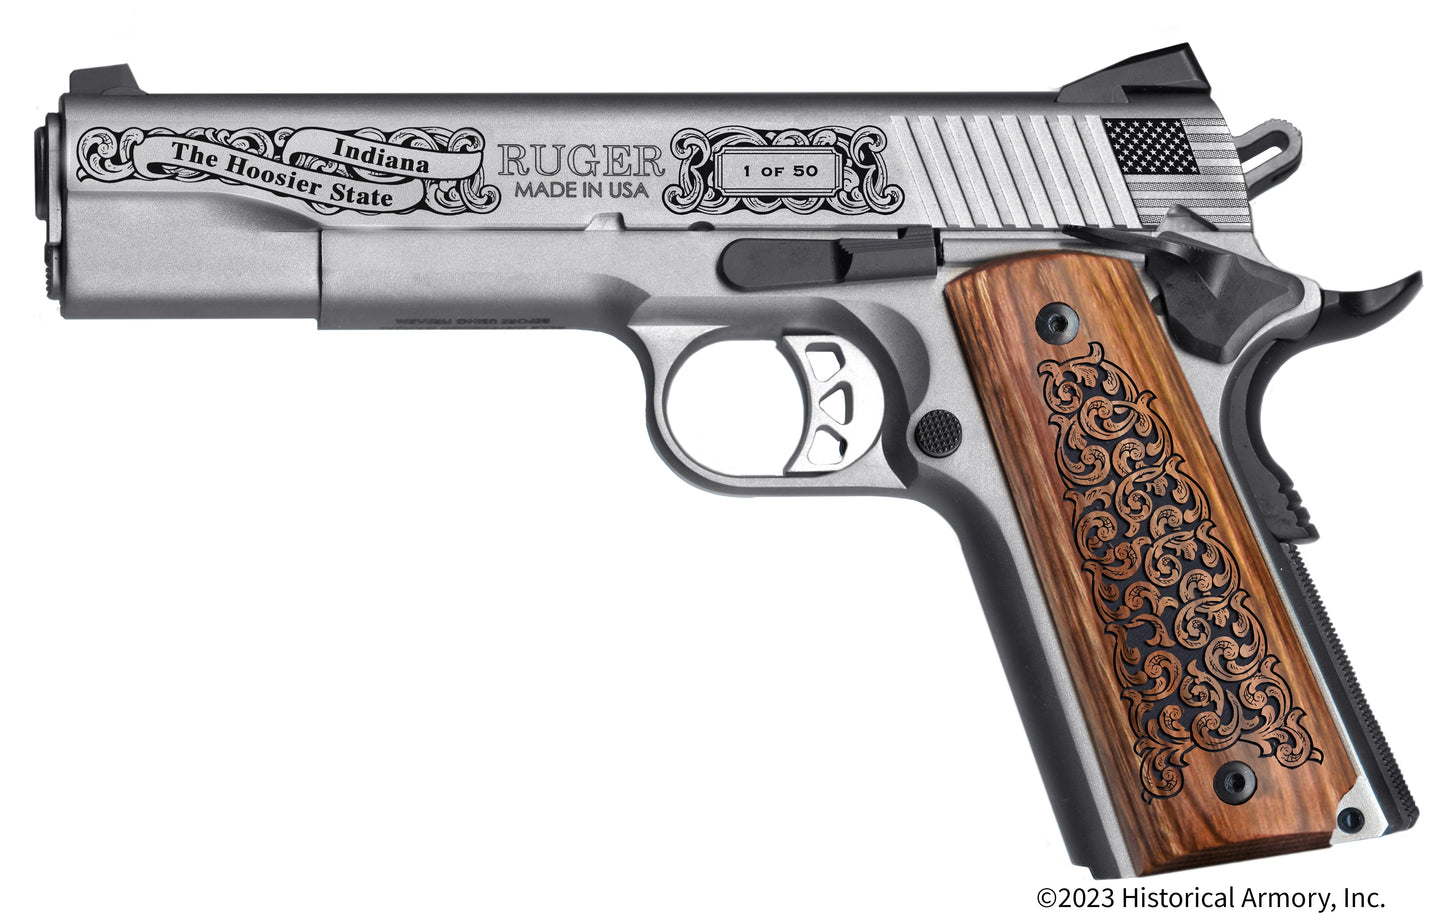 Marshall County Indiana Engraved .45 Auto Ruger 1911